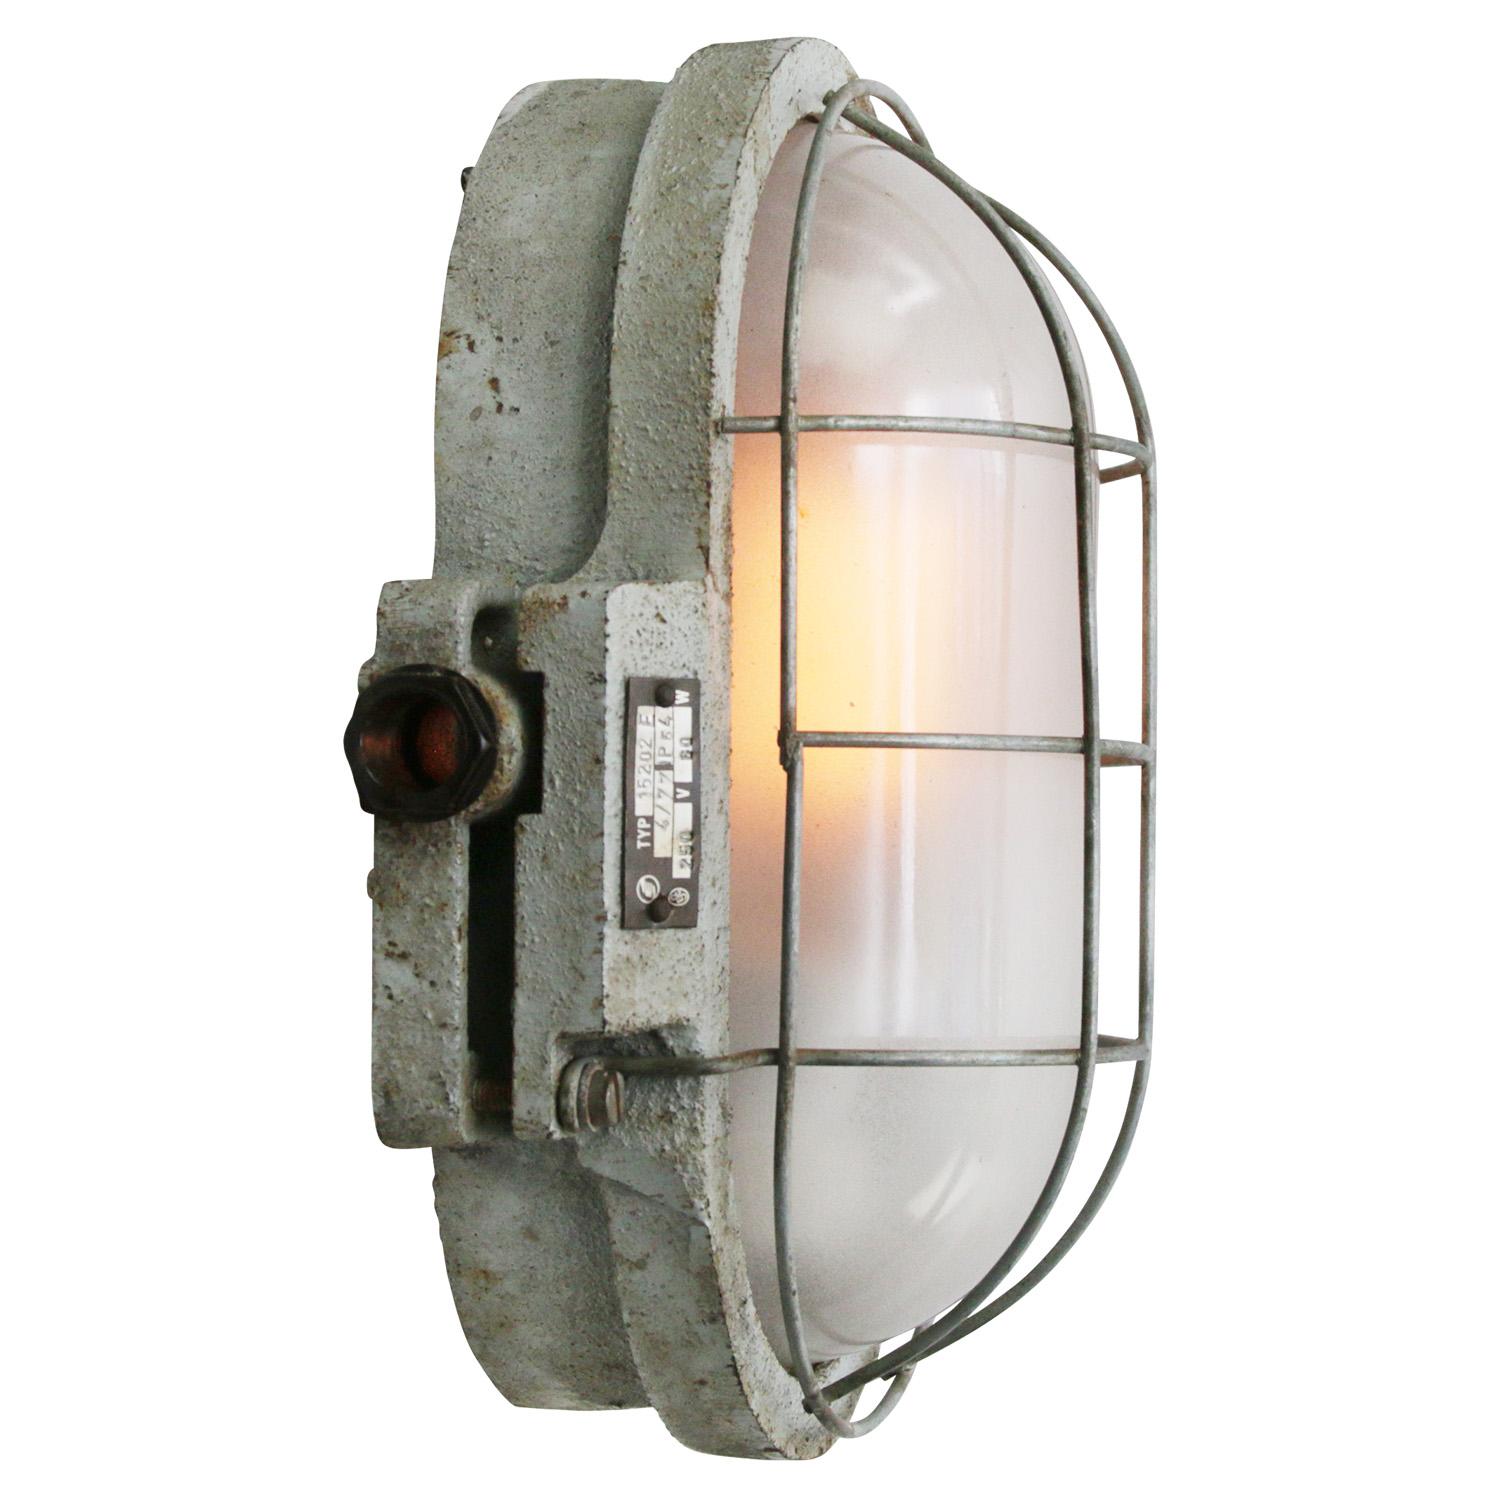 Industrial wall lamp, scone, flush mount. 
Grey cast iron. Frosted glass.

Weight: 6.0 kg / 13.2 lb

Priced per individual item. All lamps have been made suitable by international standards for incandescent light bulbs, energy-efficient and LED